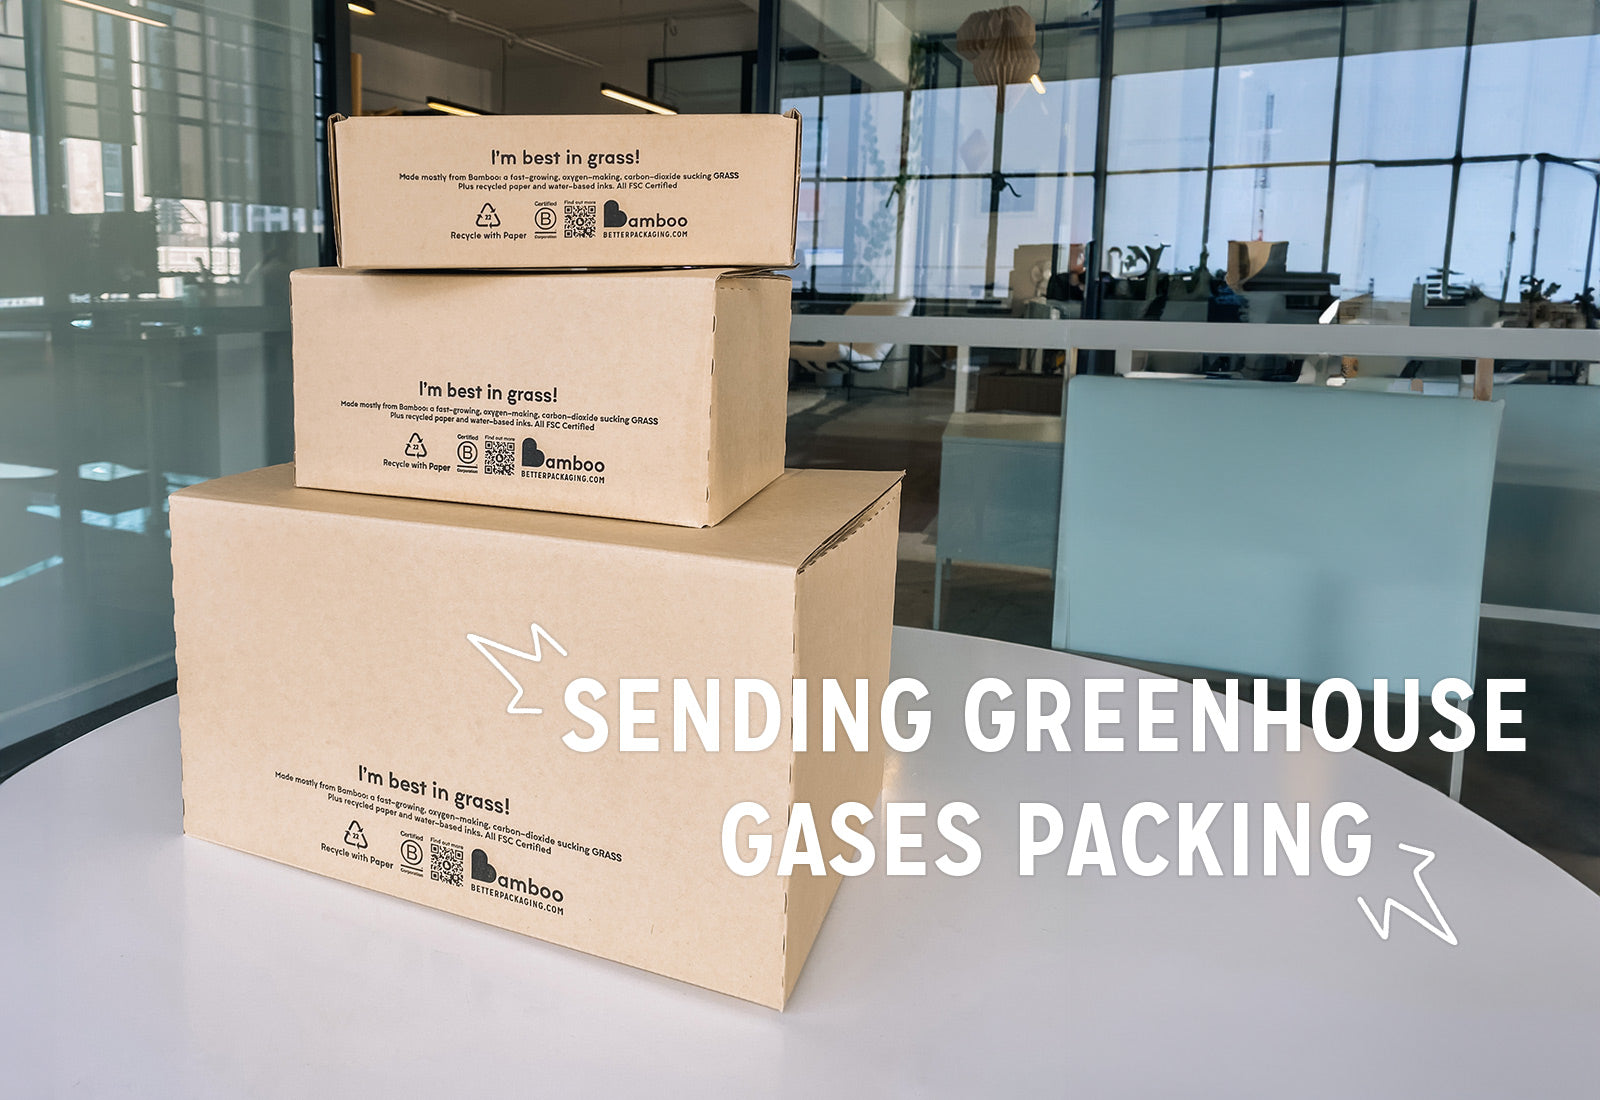 Stacked pile of bamboo boxes with a message "sending greenhouse gases packing", advocating eco-friendly packaging.